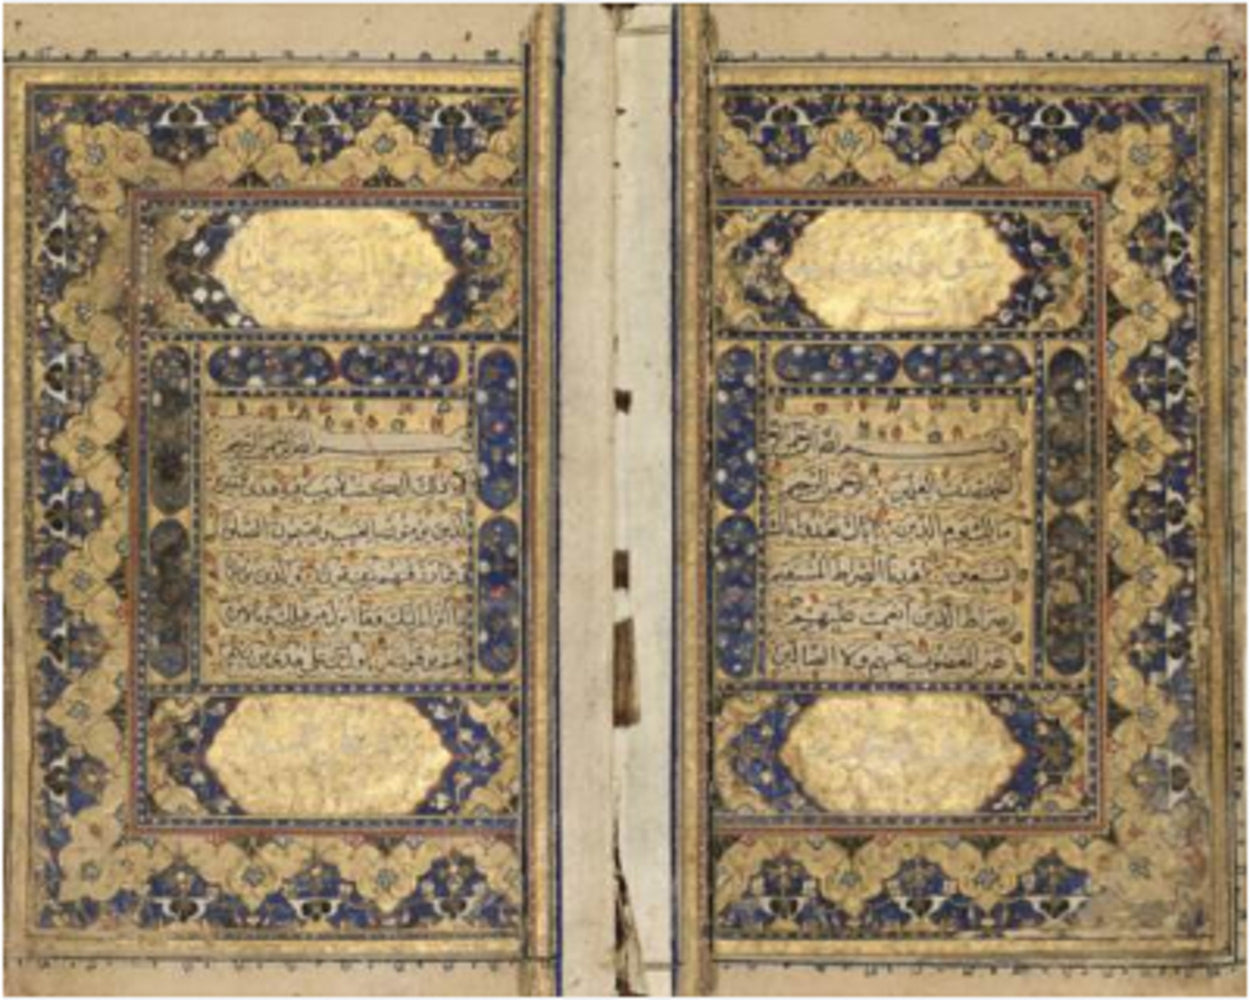 18th Century Quran from India